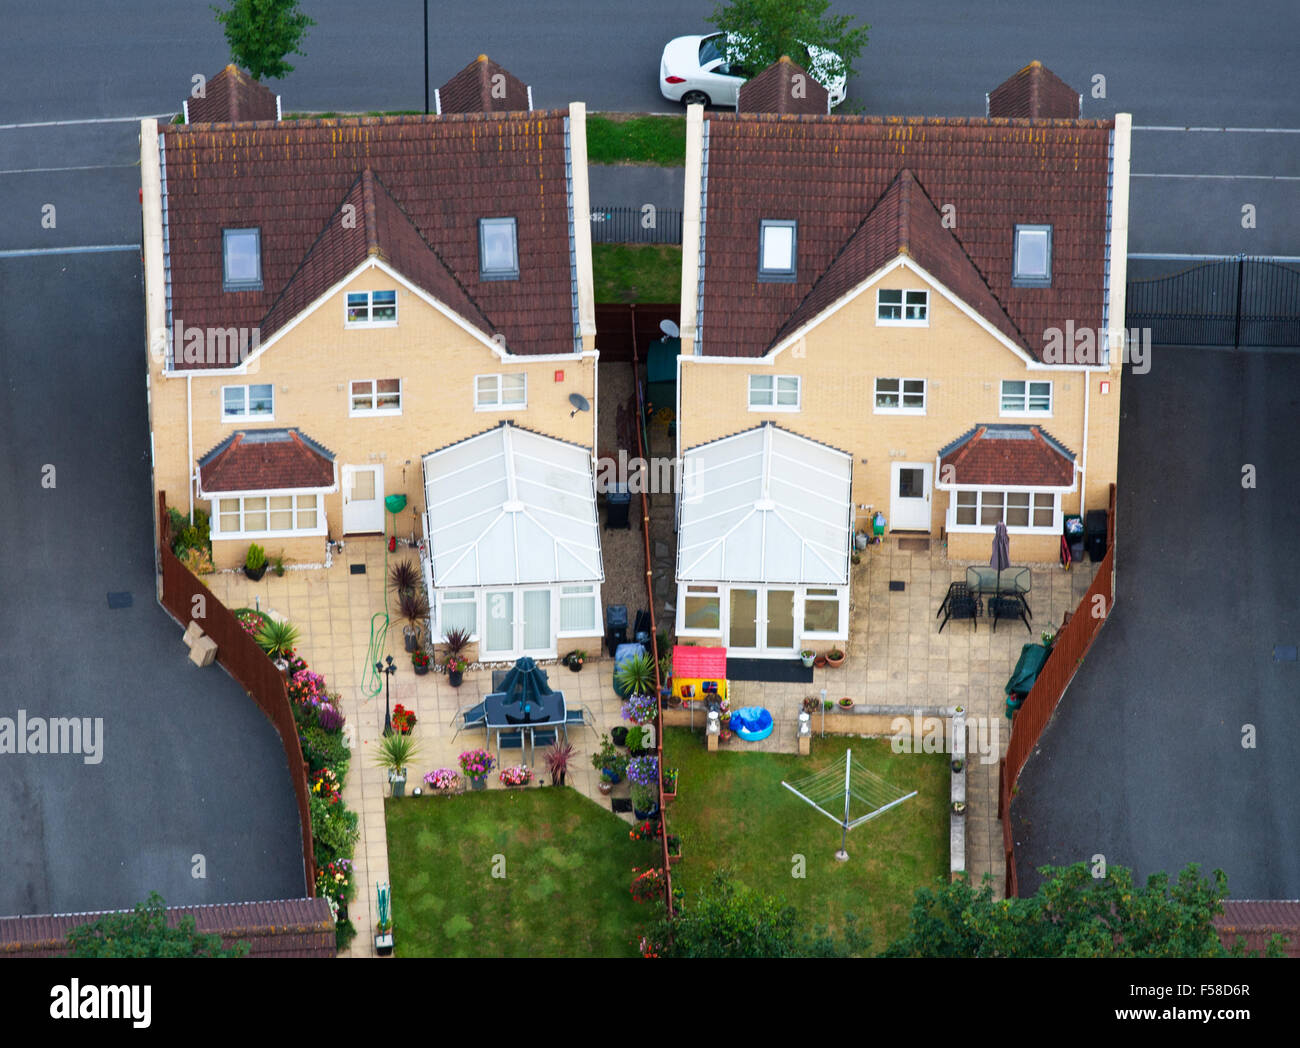 Aerial views of houses Stock Photo